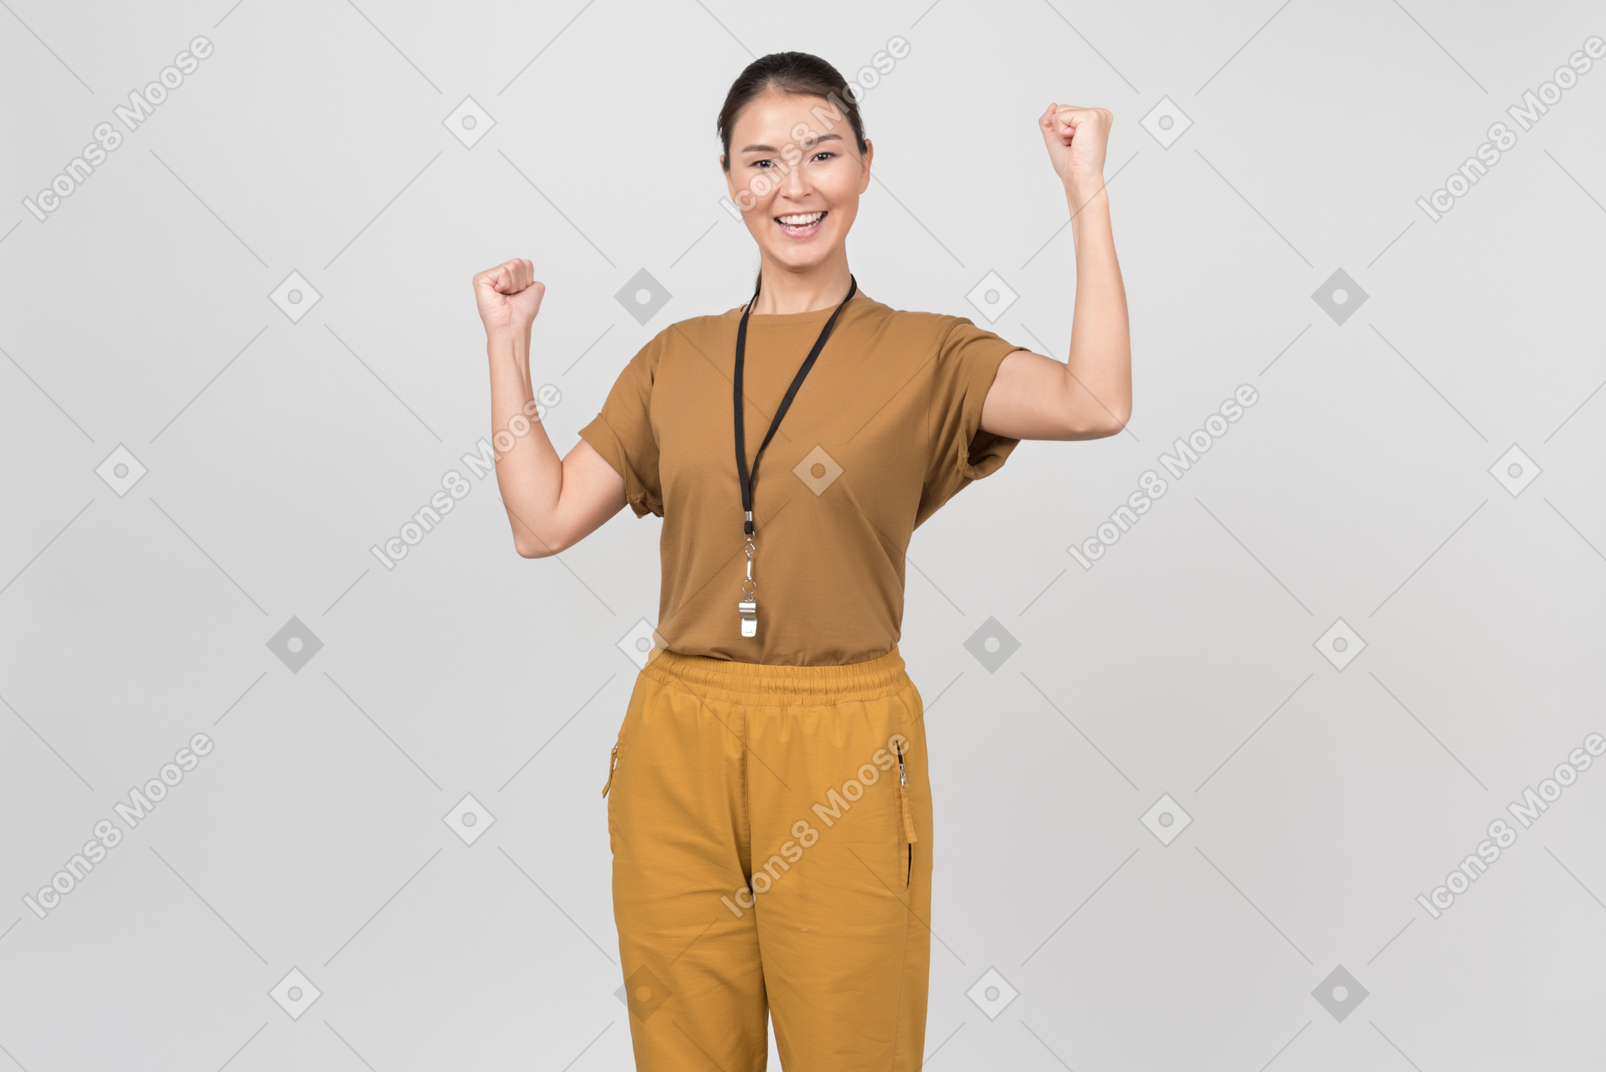 Young smiling pe teacher holding her hands up